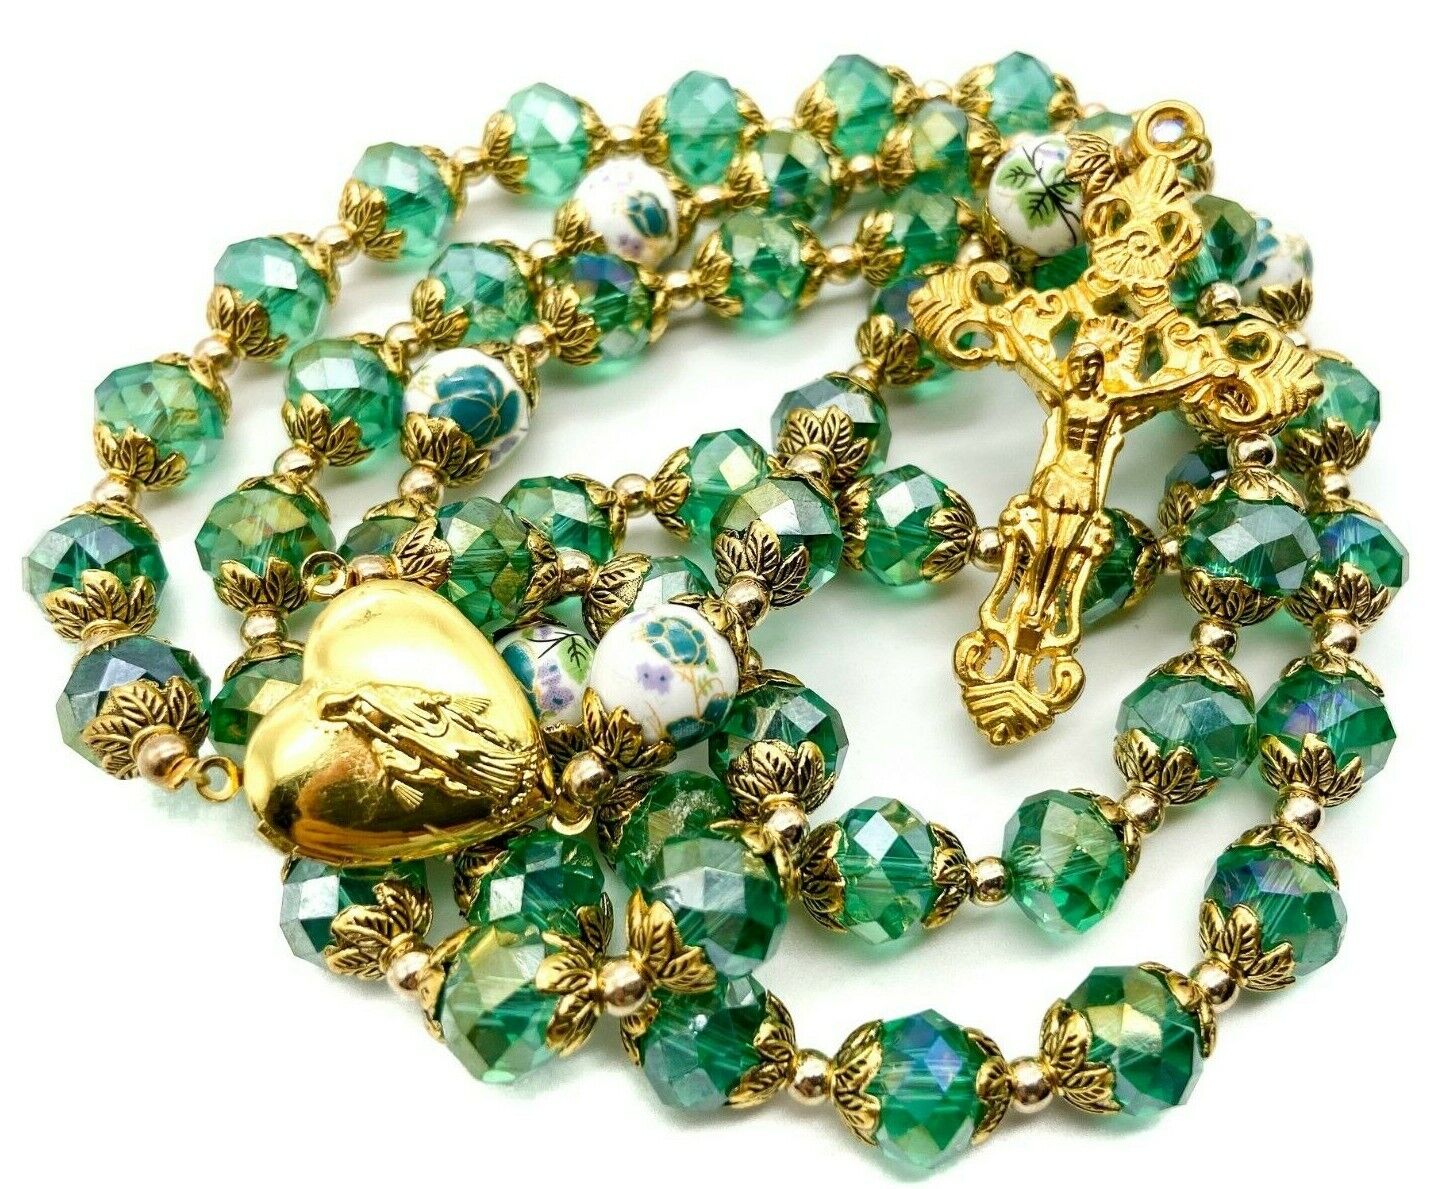 Catholic Green Crystals Beads Gold Rosary Necklace Miraculous Medal